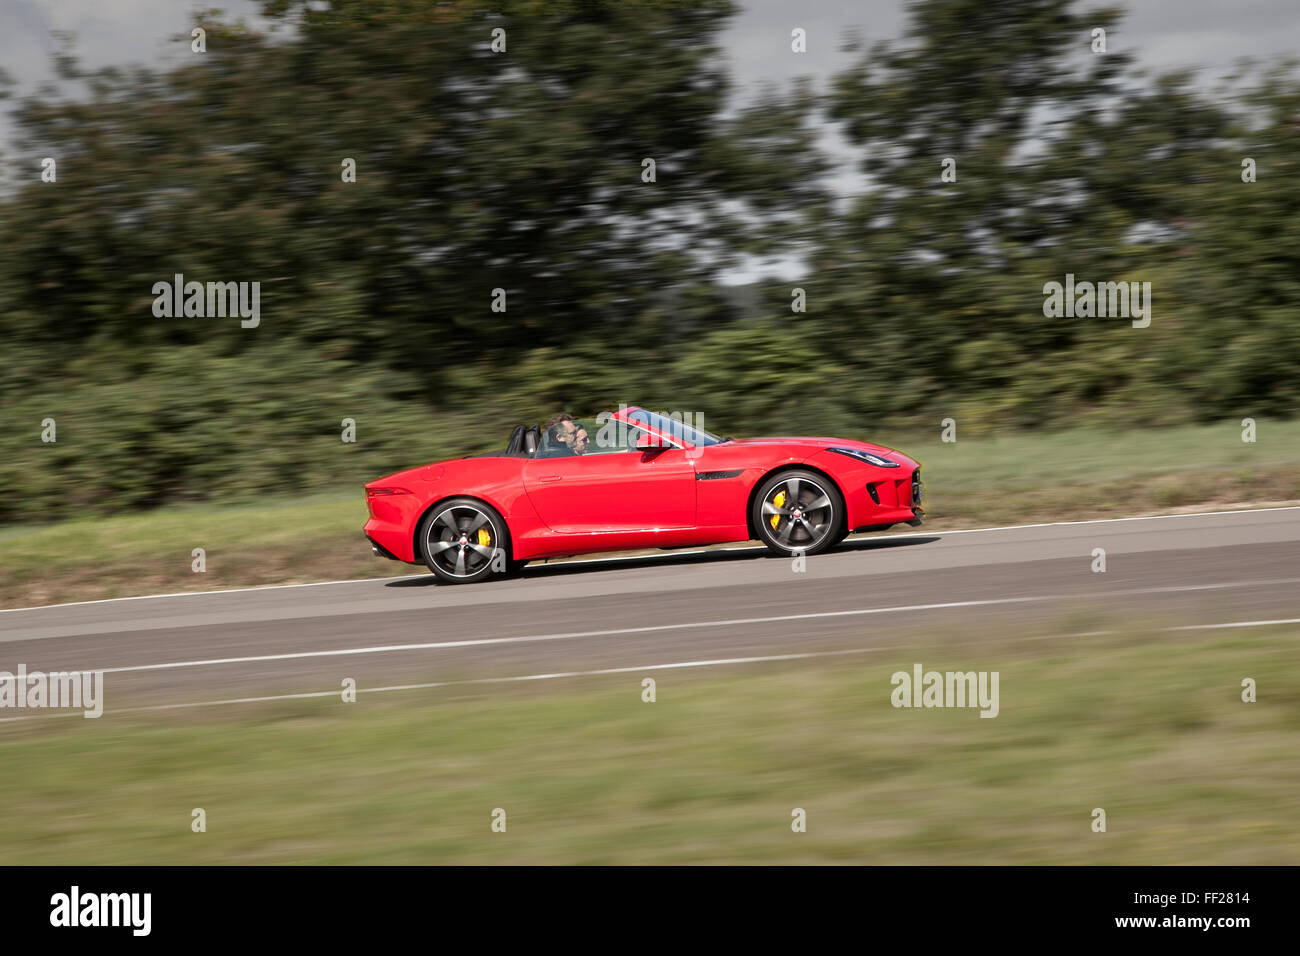 Jaguar Heritage experience. Jaguar F Type convertible being driven on the test track Stock Photo